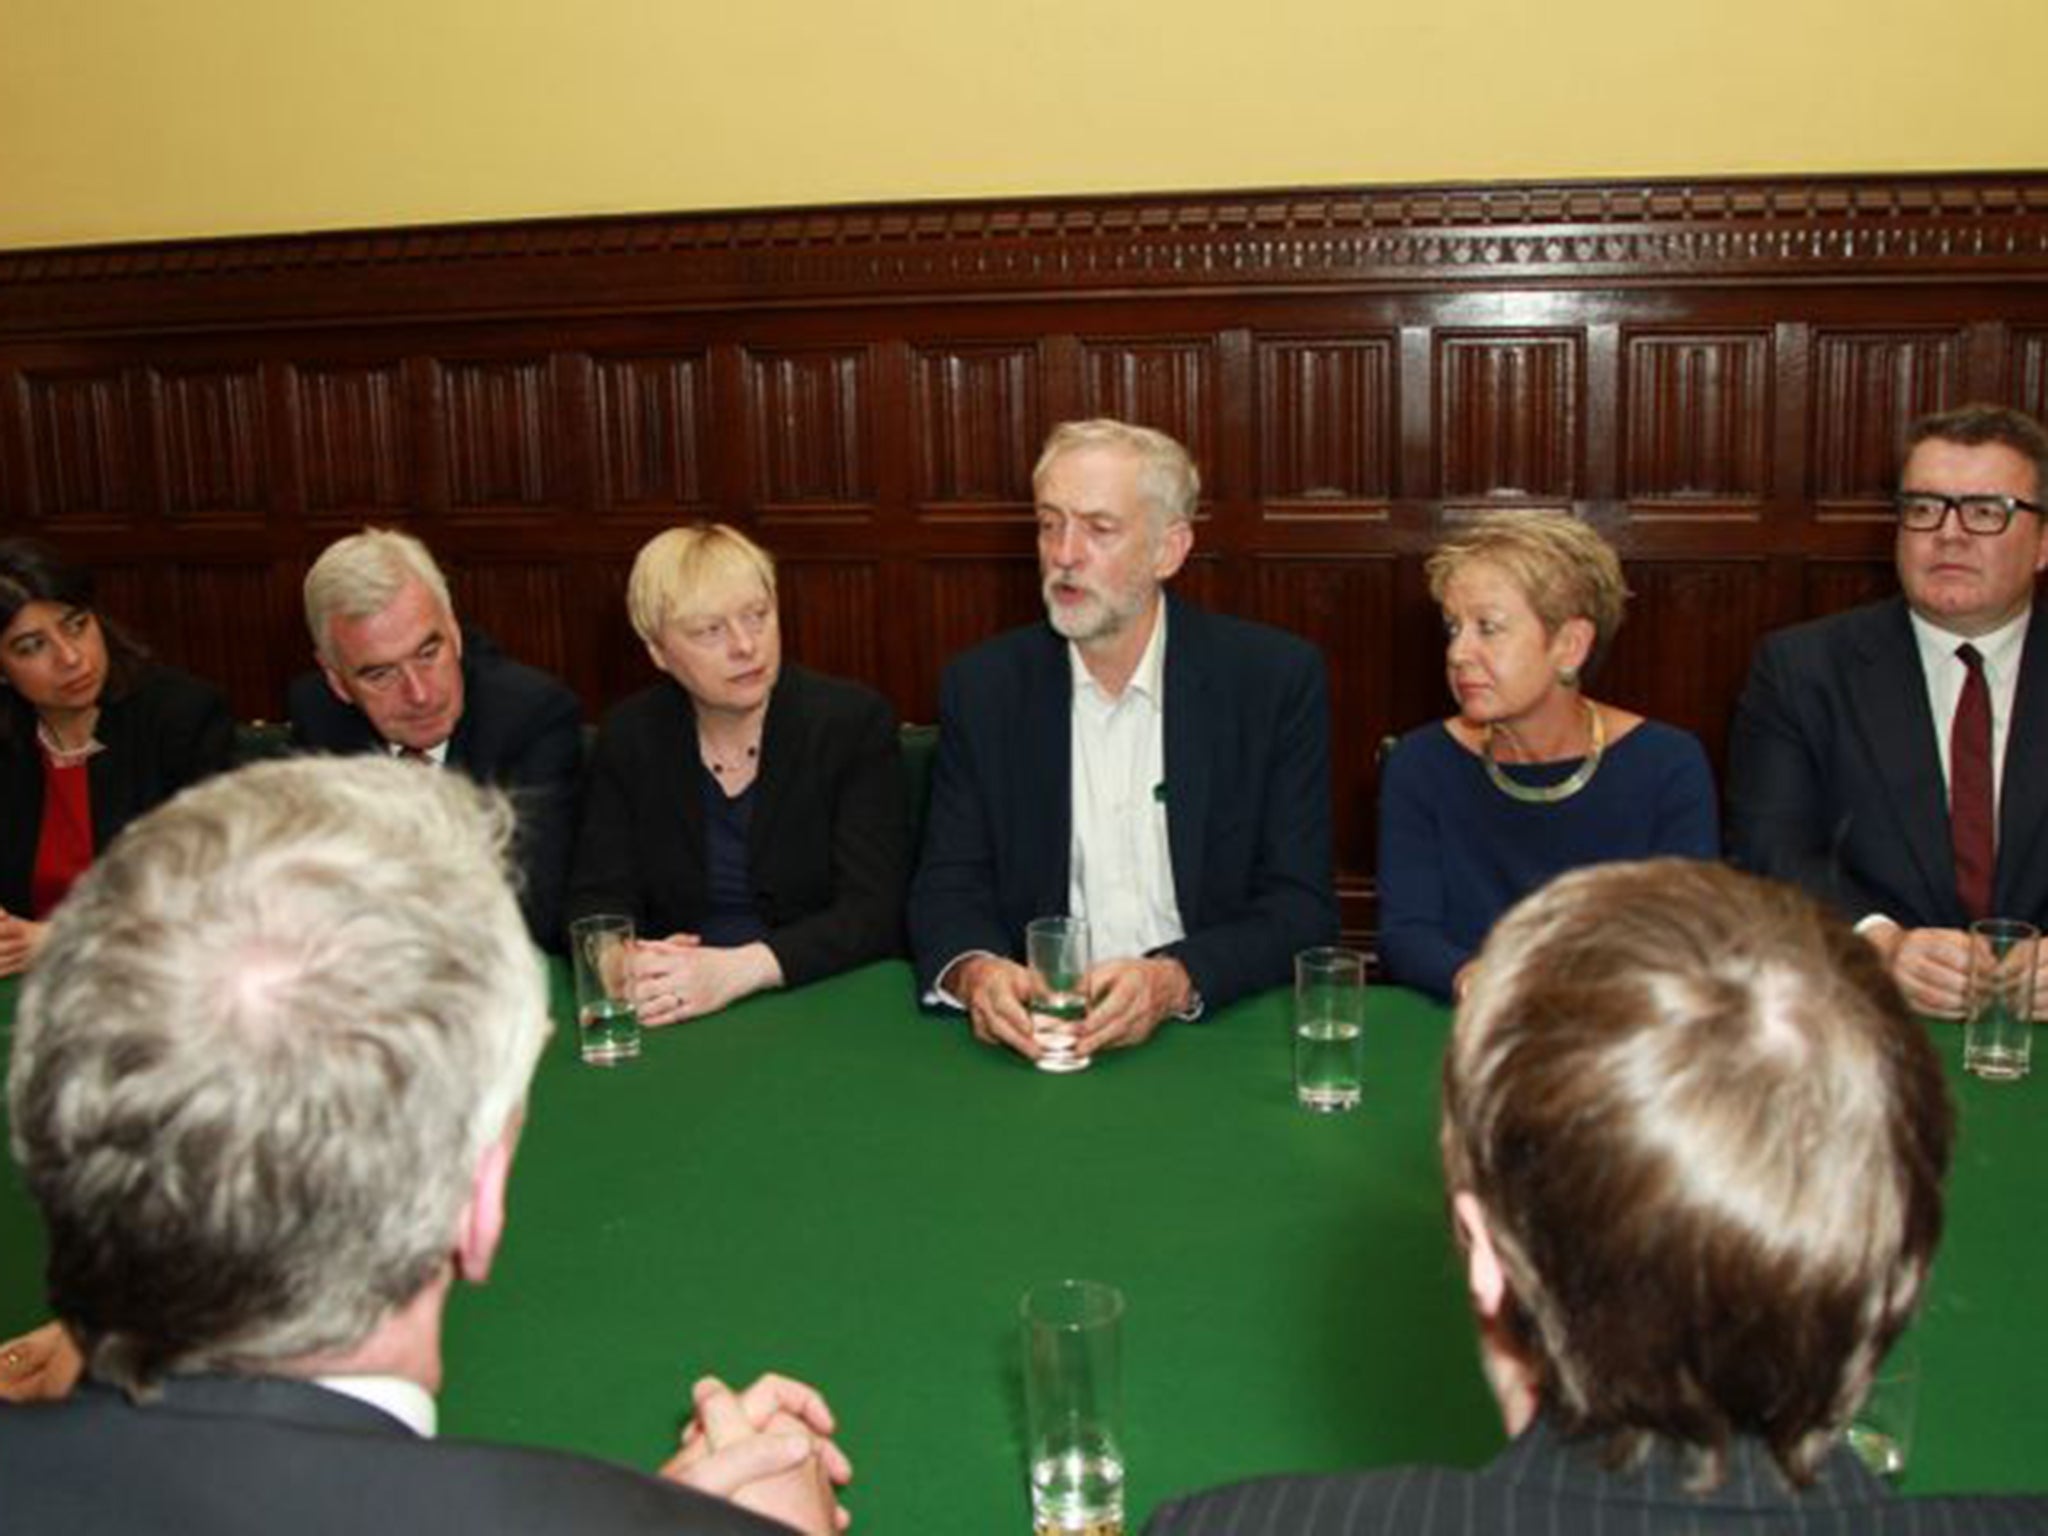 Jeremy Corbyn, flanked by, from left: shadow Chancellor John McDonnell, shadow Business Secretary Angela Eagle, shadow Leader of the Lords Baroness Smith, and deputy leader Tom Watson, at the first meeting of his Shadow Cabinet on Monday